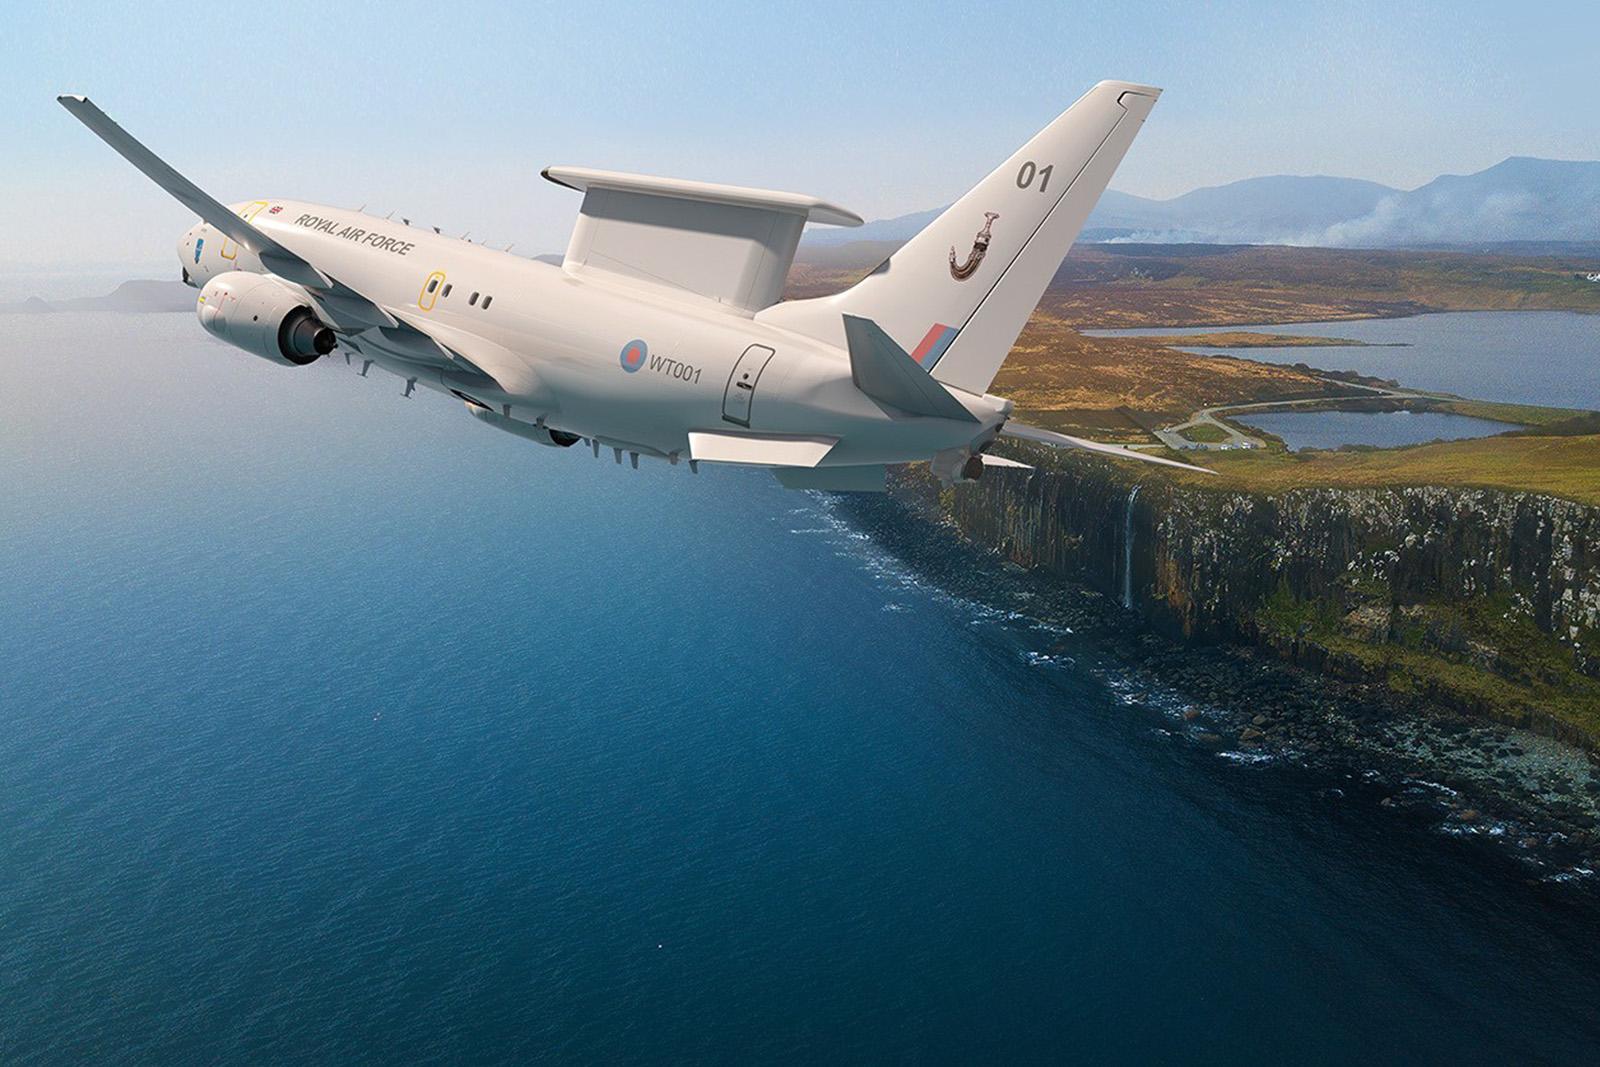 RAF’s new Wedgetail airborne early warning platform 